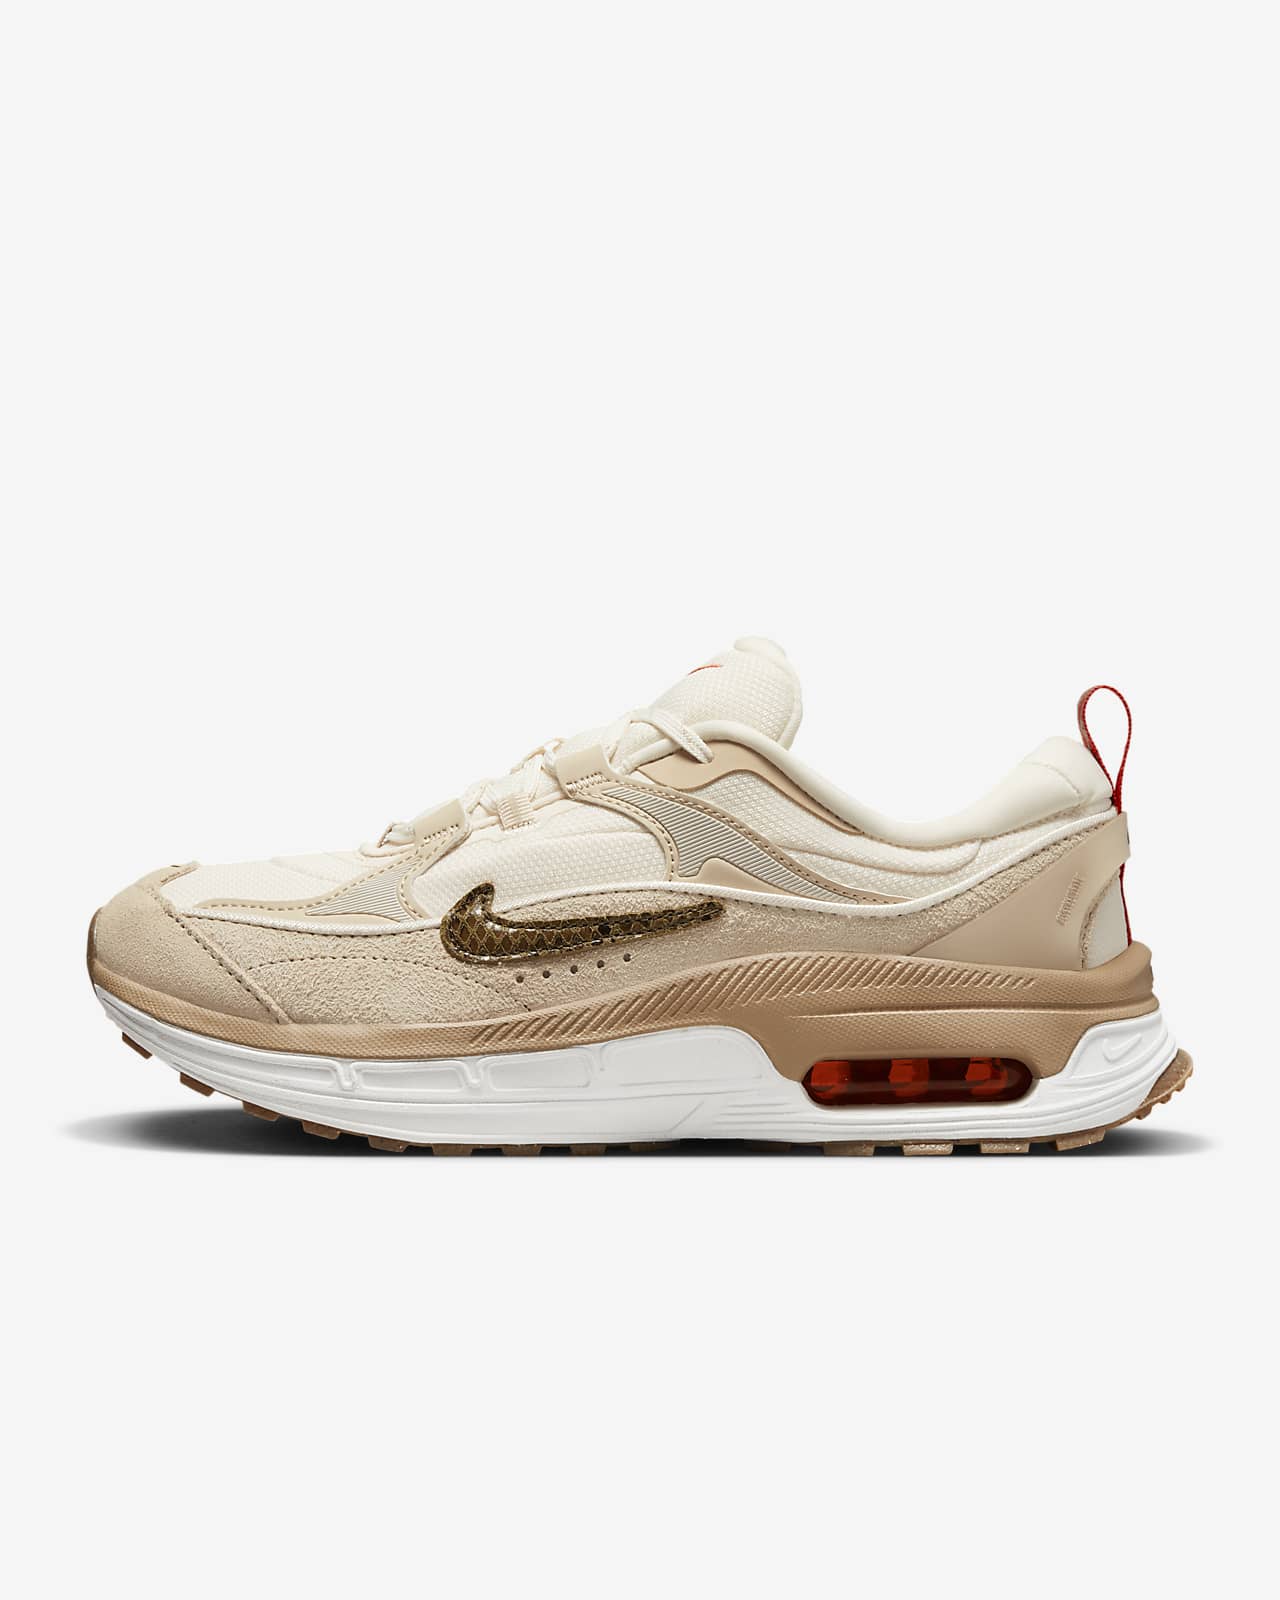 Nike Air Max Bliss SE Womens Shoes Review